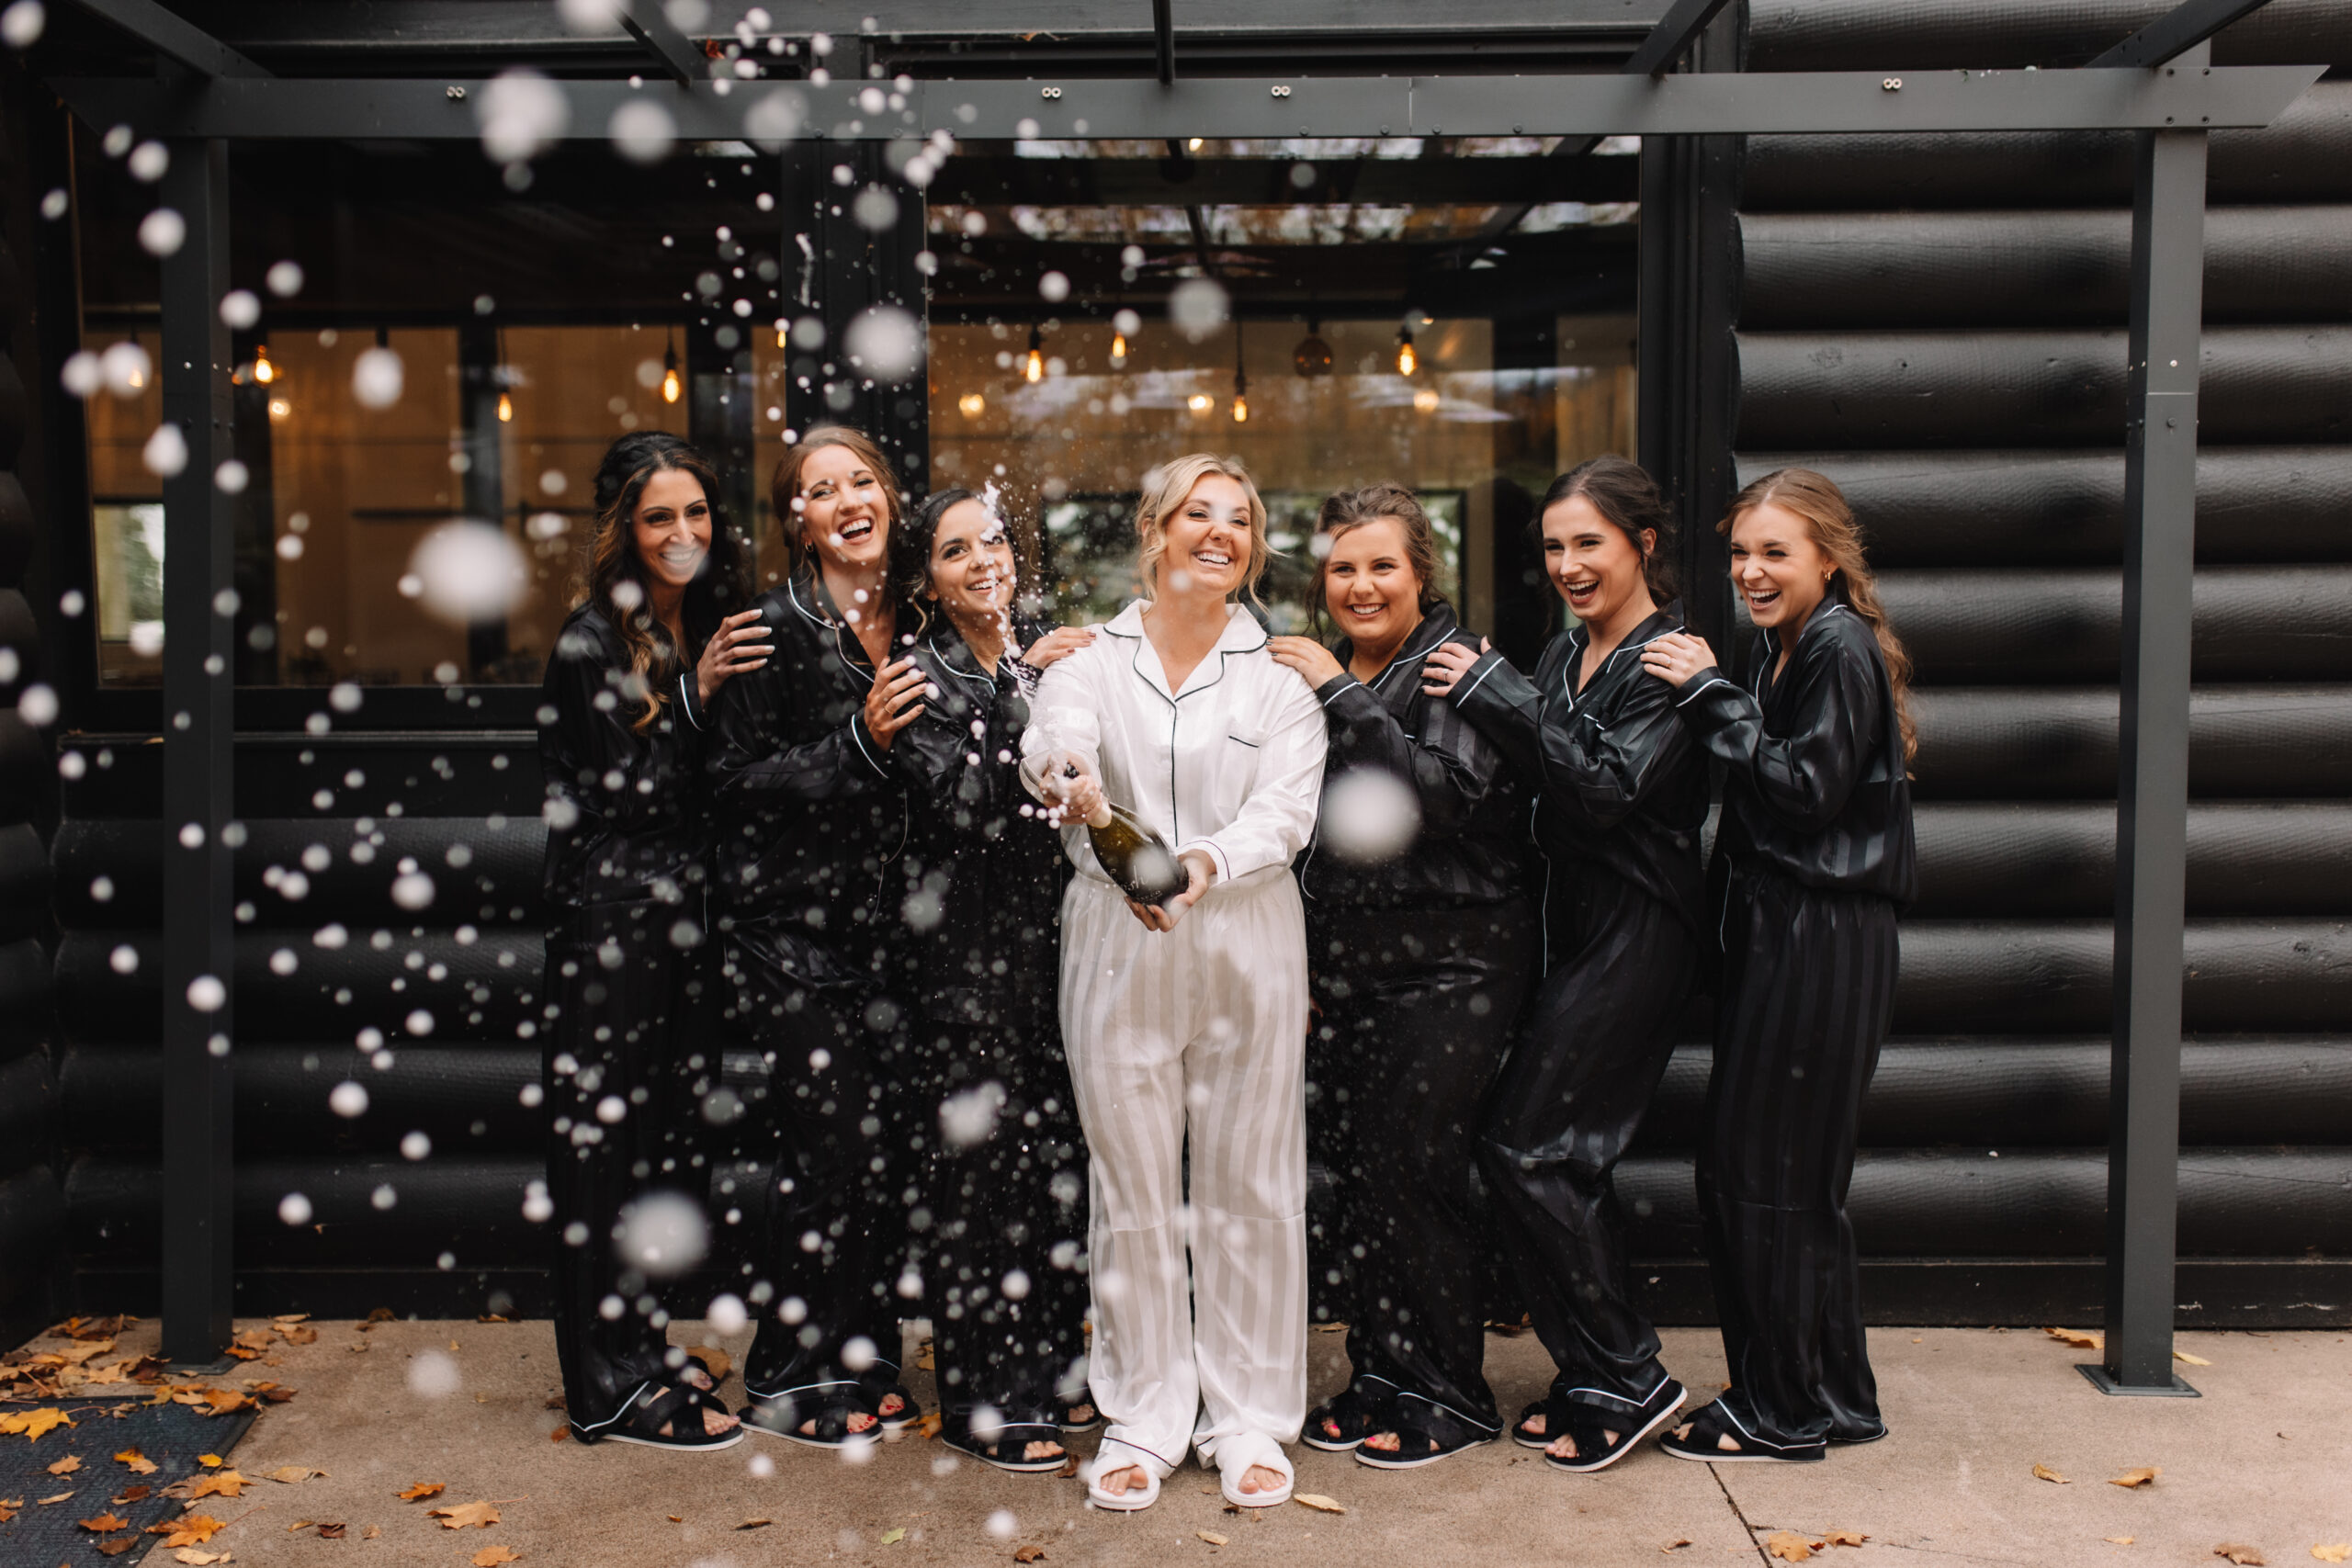 A fun wedding shot of a bride, and her bridesmaids in their matching black outfits, doing a champagne spray to celebrate the start of the wedding day in Minneapolis, Minnesota